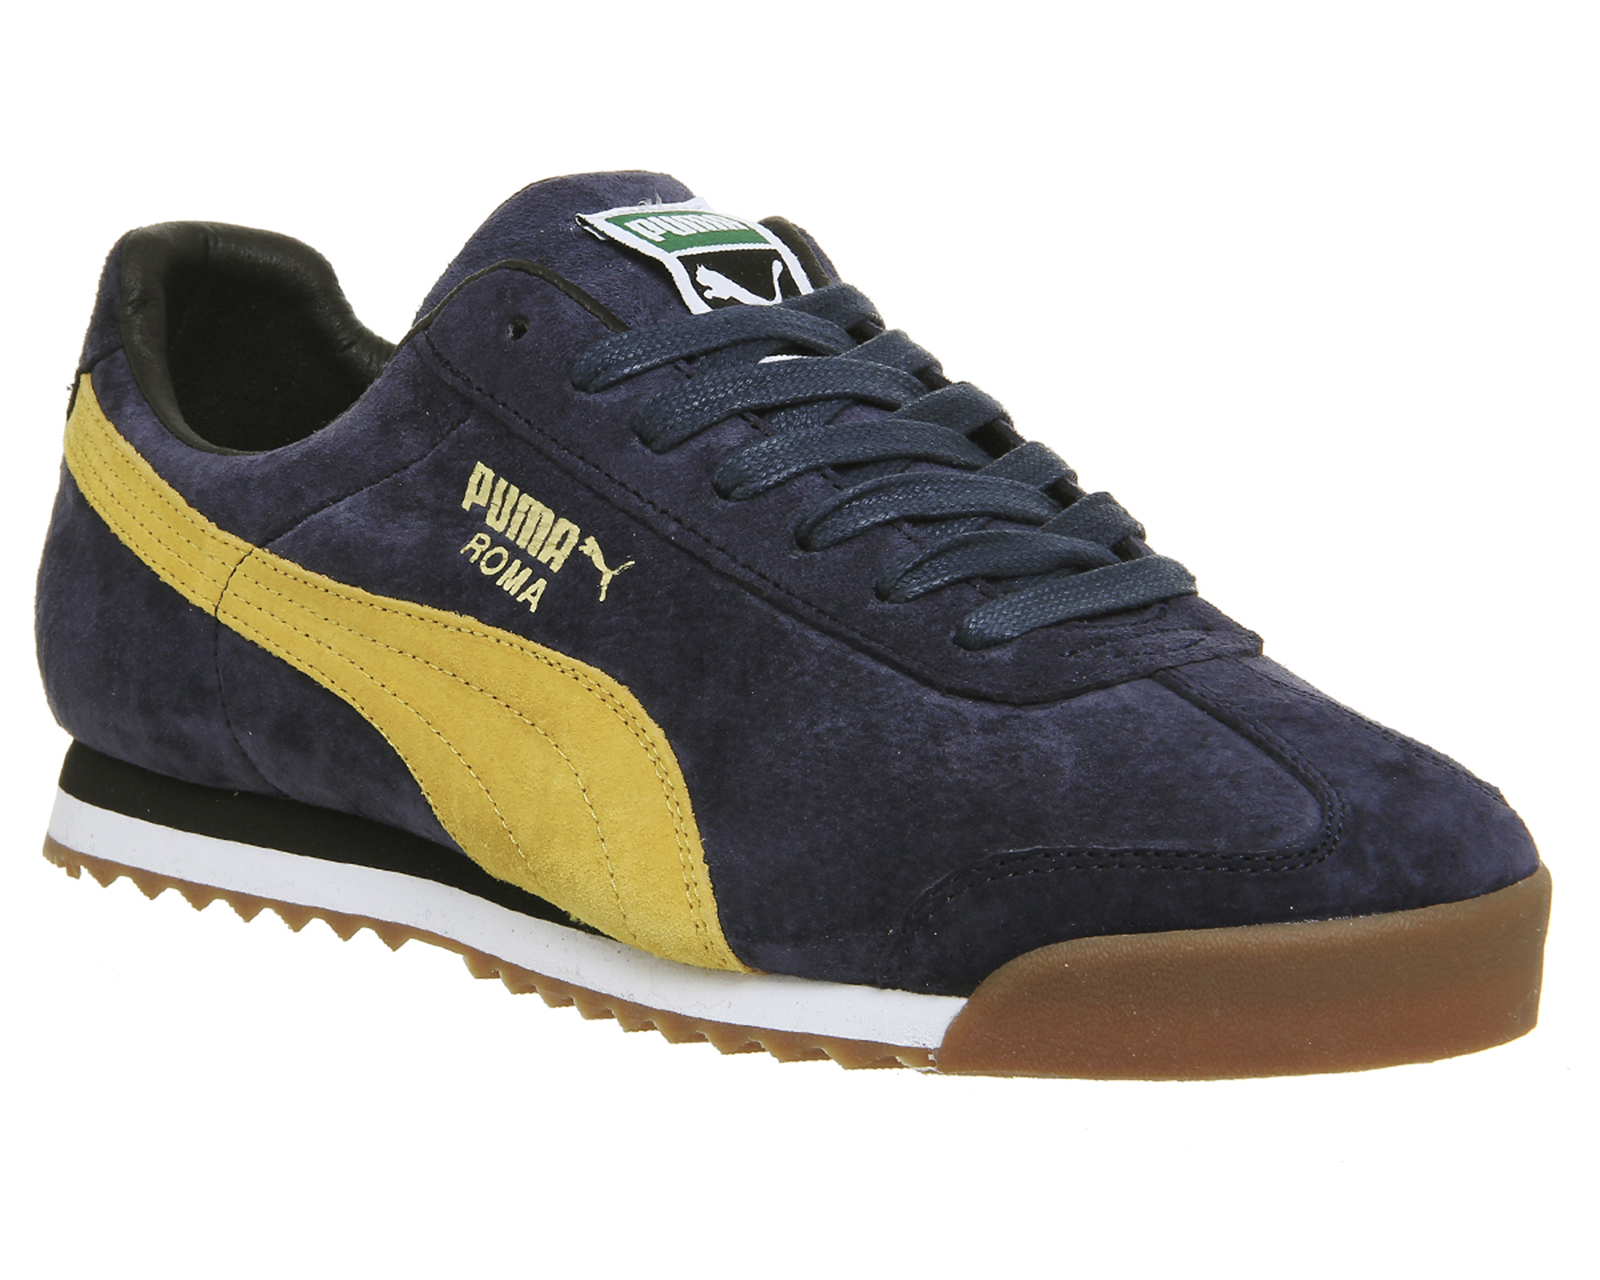 Puma Roma Navy Yellow Suede Exclusive 